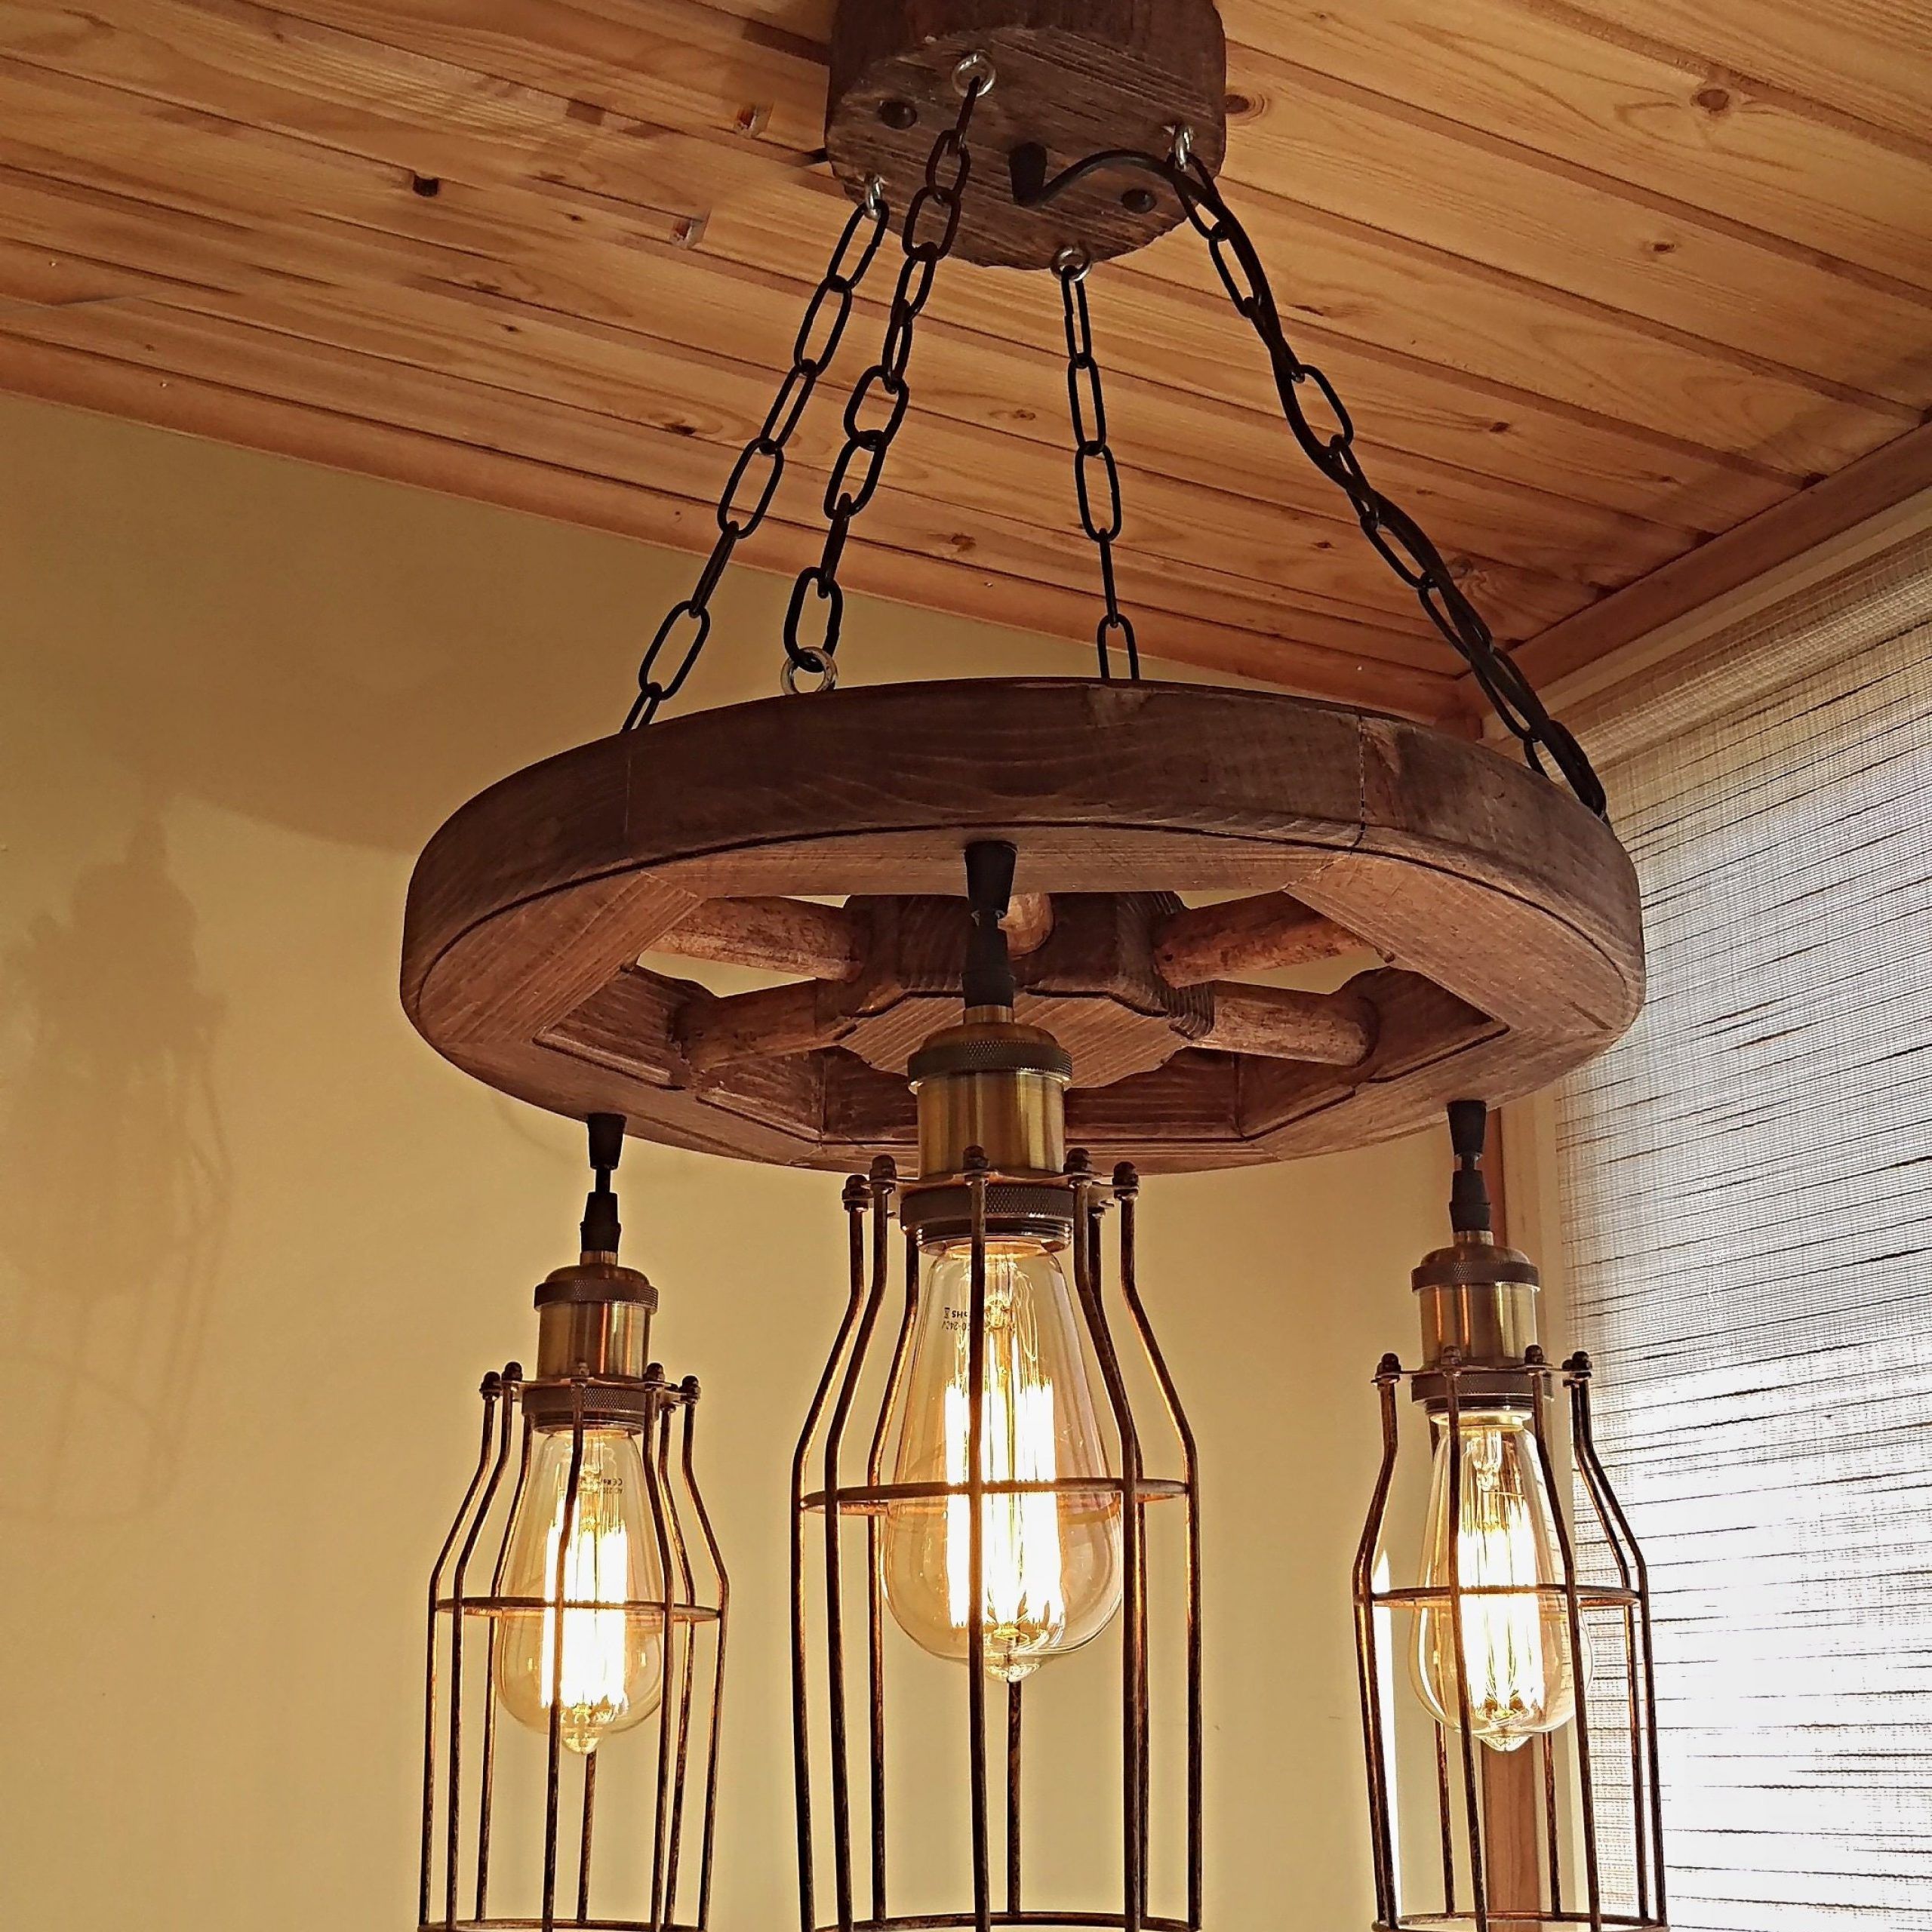 Wood Wagon Wheel Chandelier For Well Known Wood Ring Modern Wagon Wheel Chandeliers (View 8 of 15)